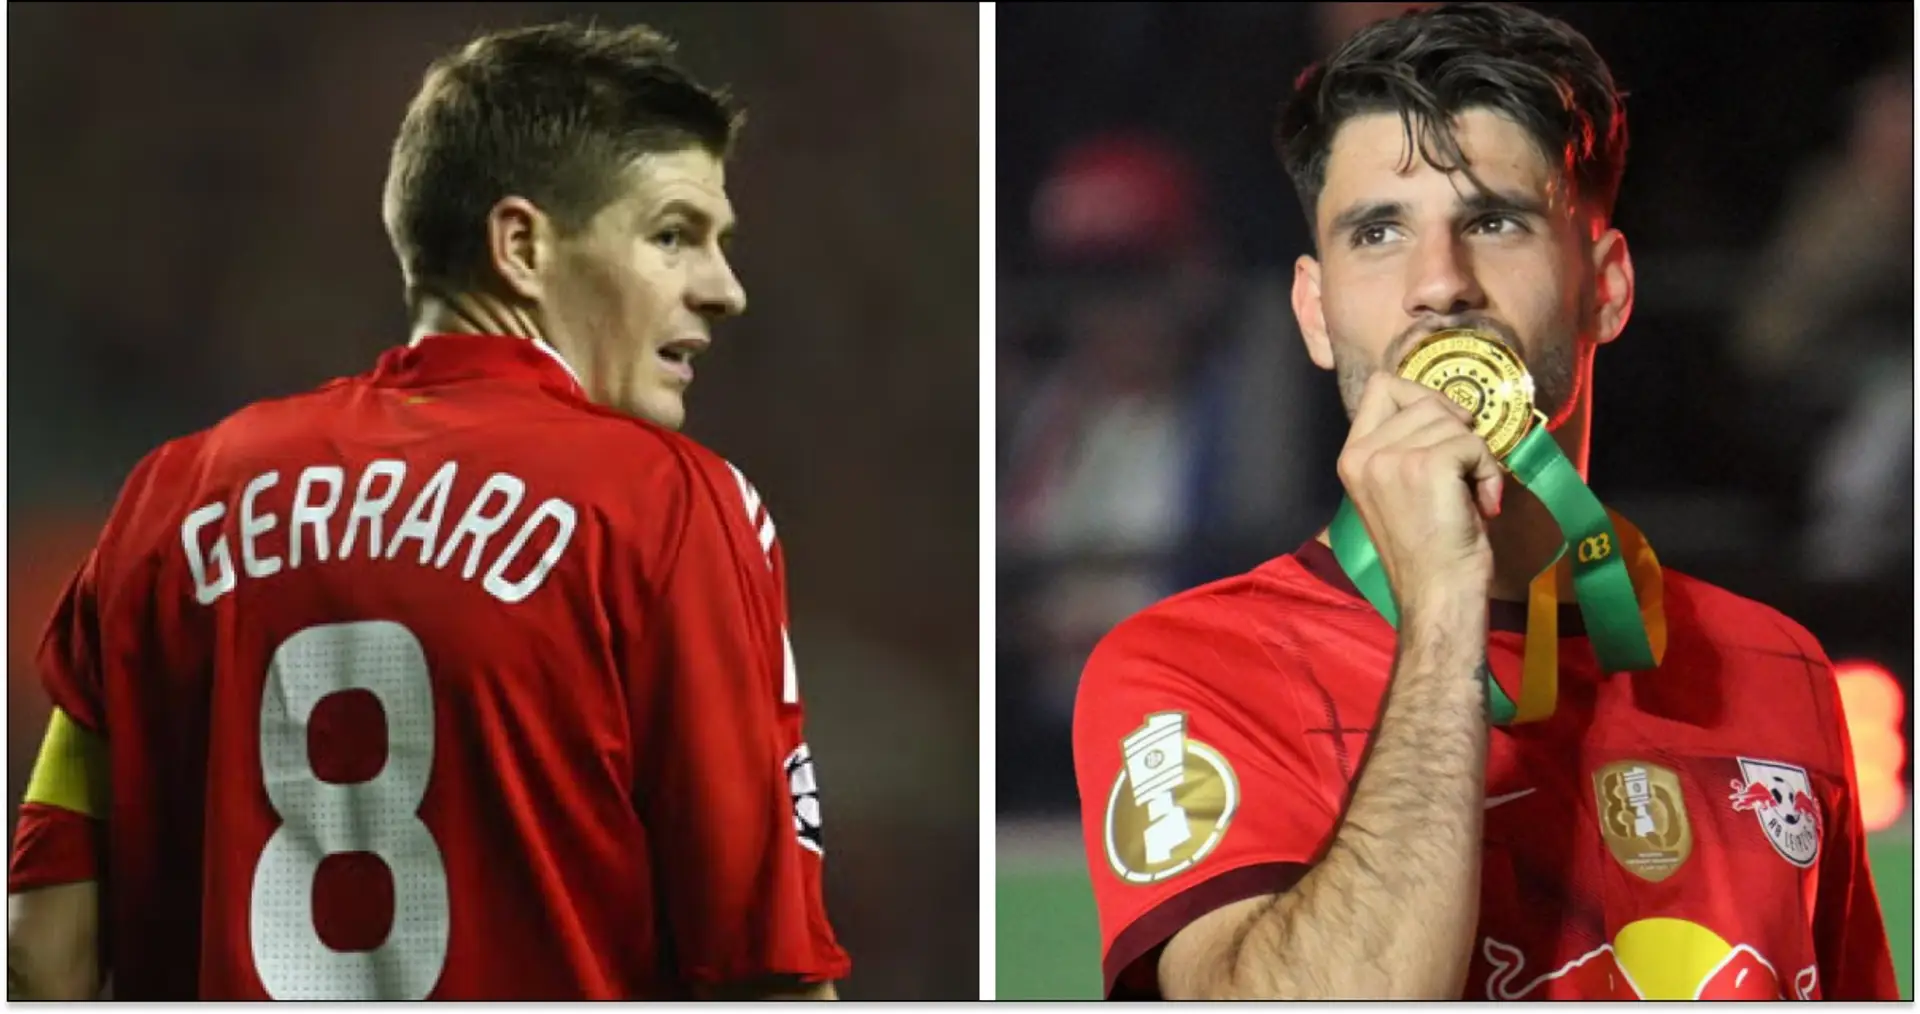 Gerrard's iconic 8 & two more Liverpool squad numbers Dominik Szoboszlai may take up